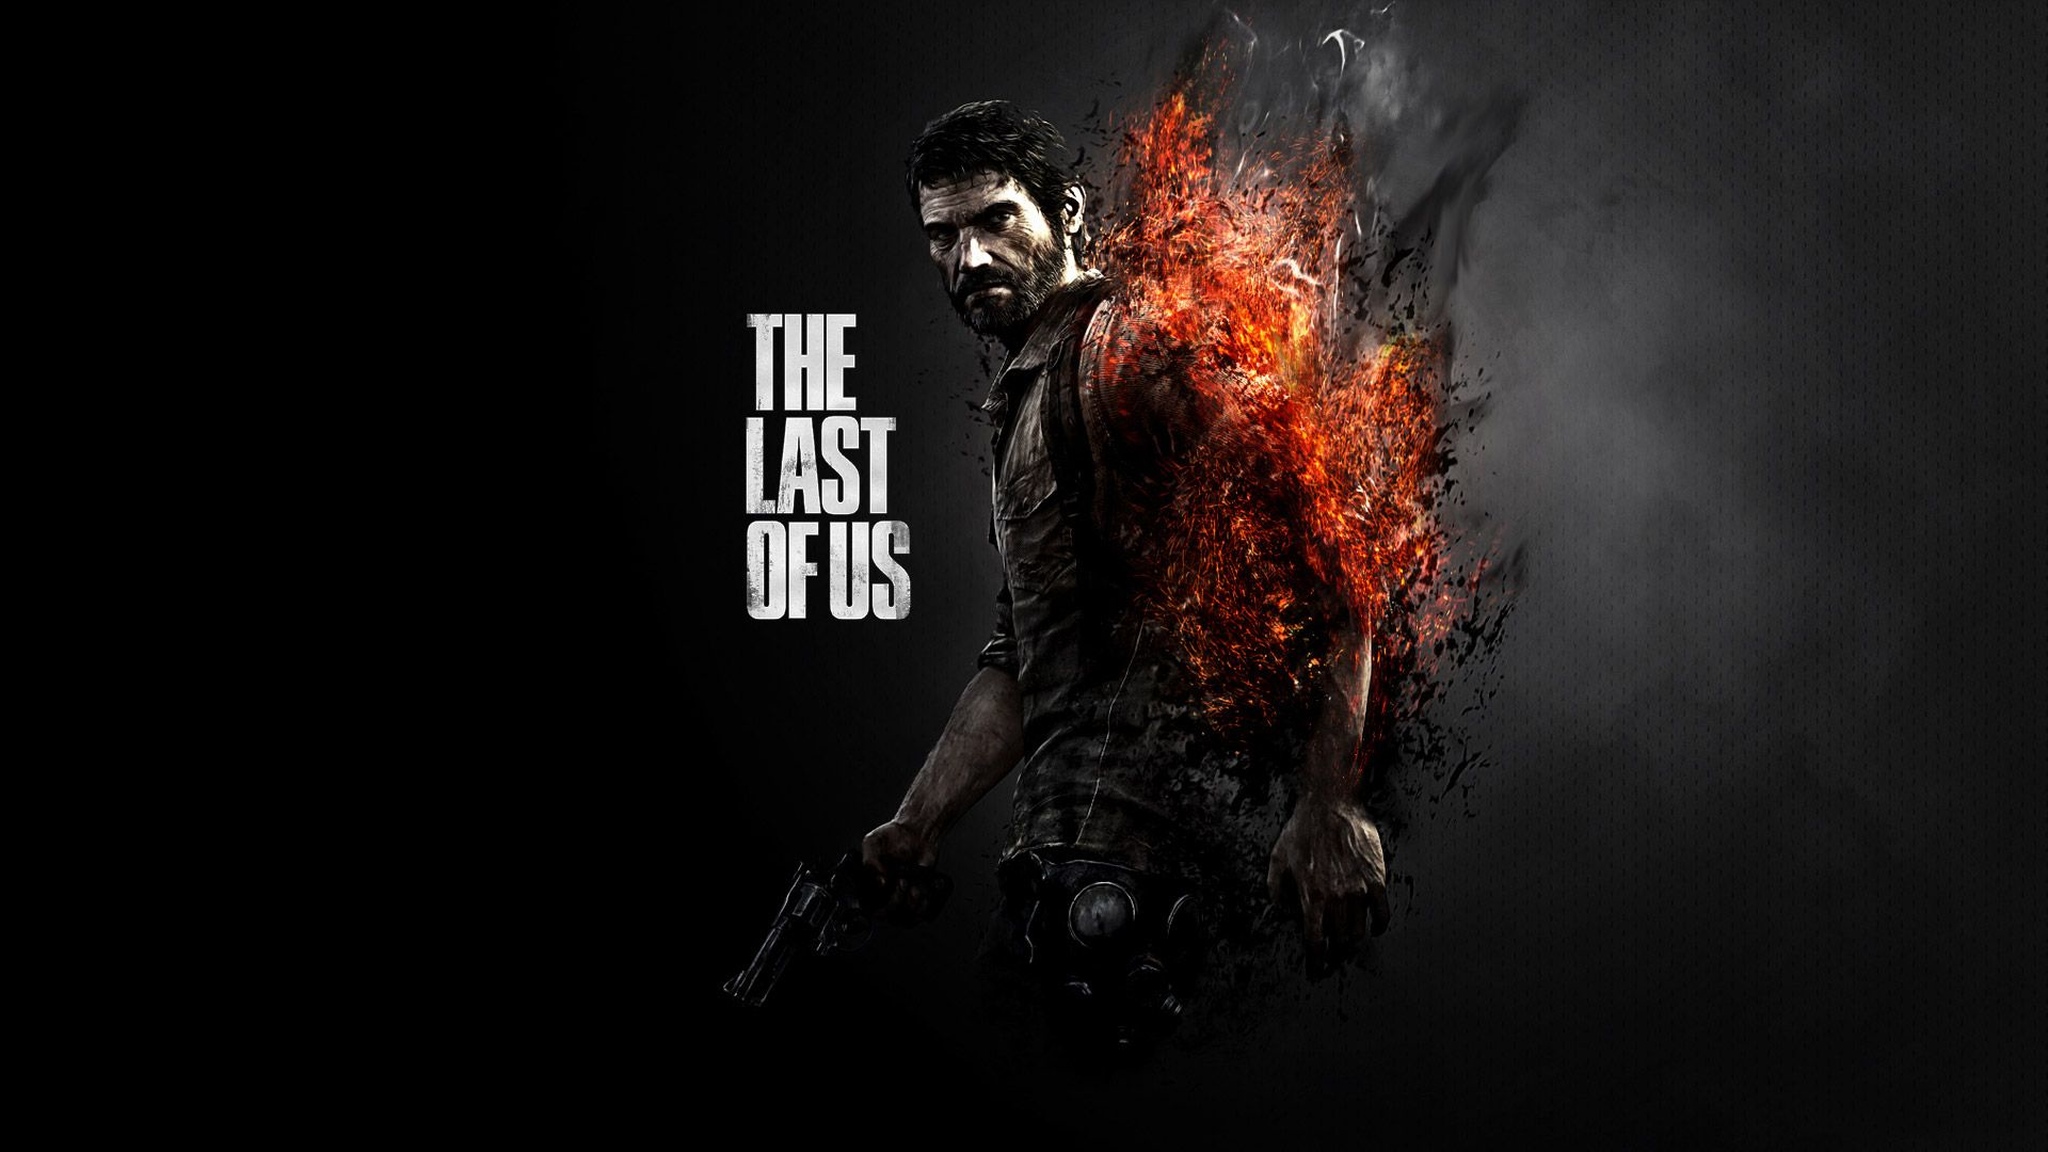 Ласто фаст. The last of us. The last of us игра. Джоэл the last of us. Обои the last of us 1920x1080 Джоэл.